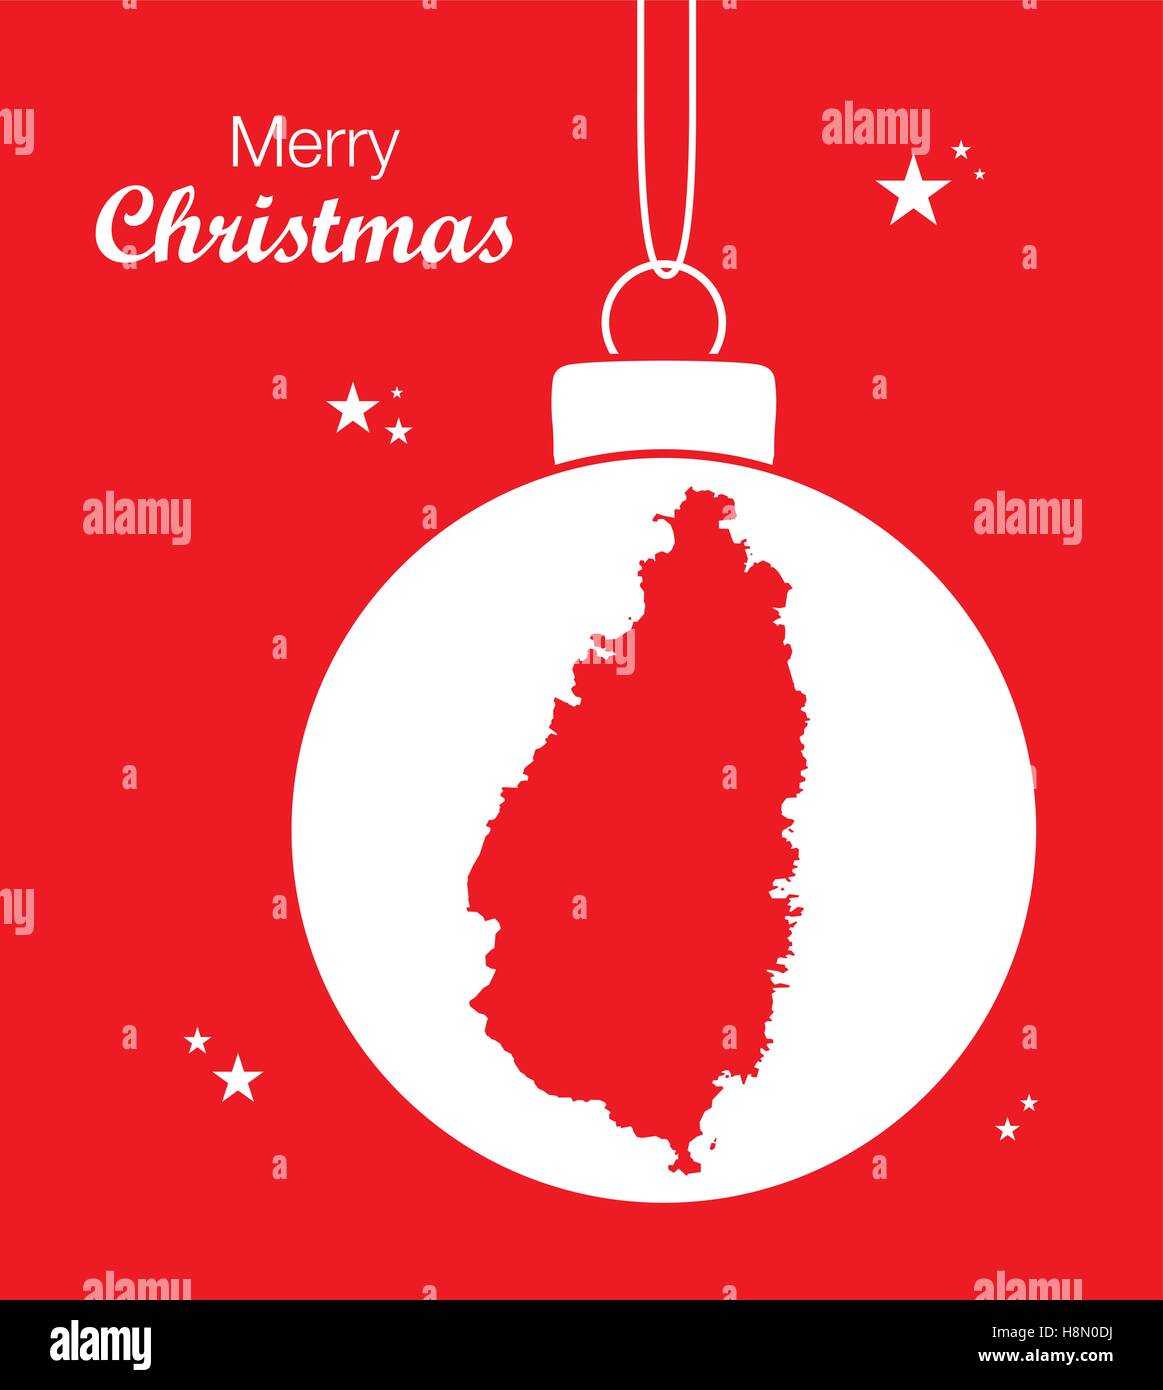 Merry Christmas Map St. Lucia Stock Vector